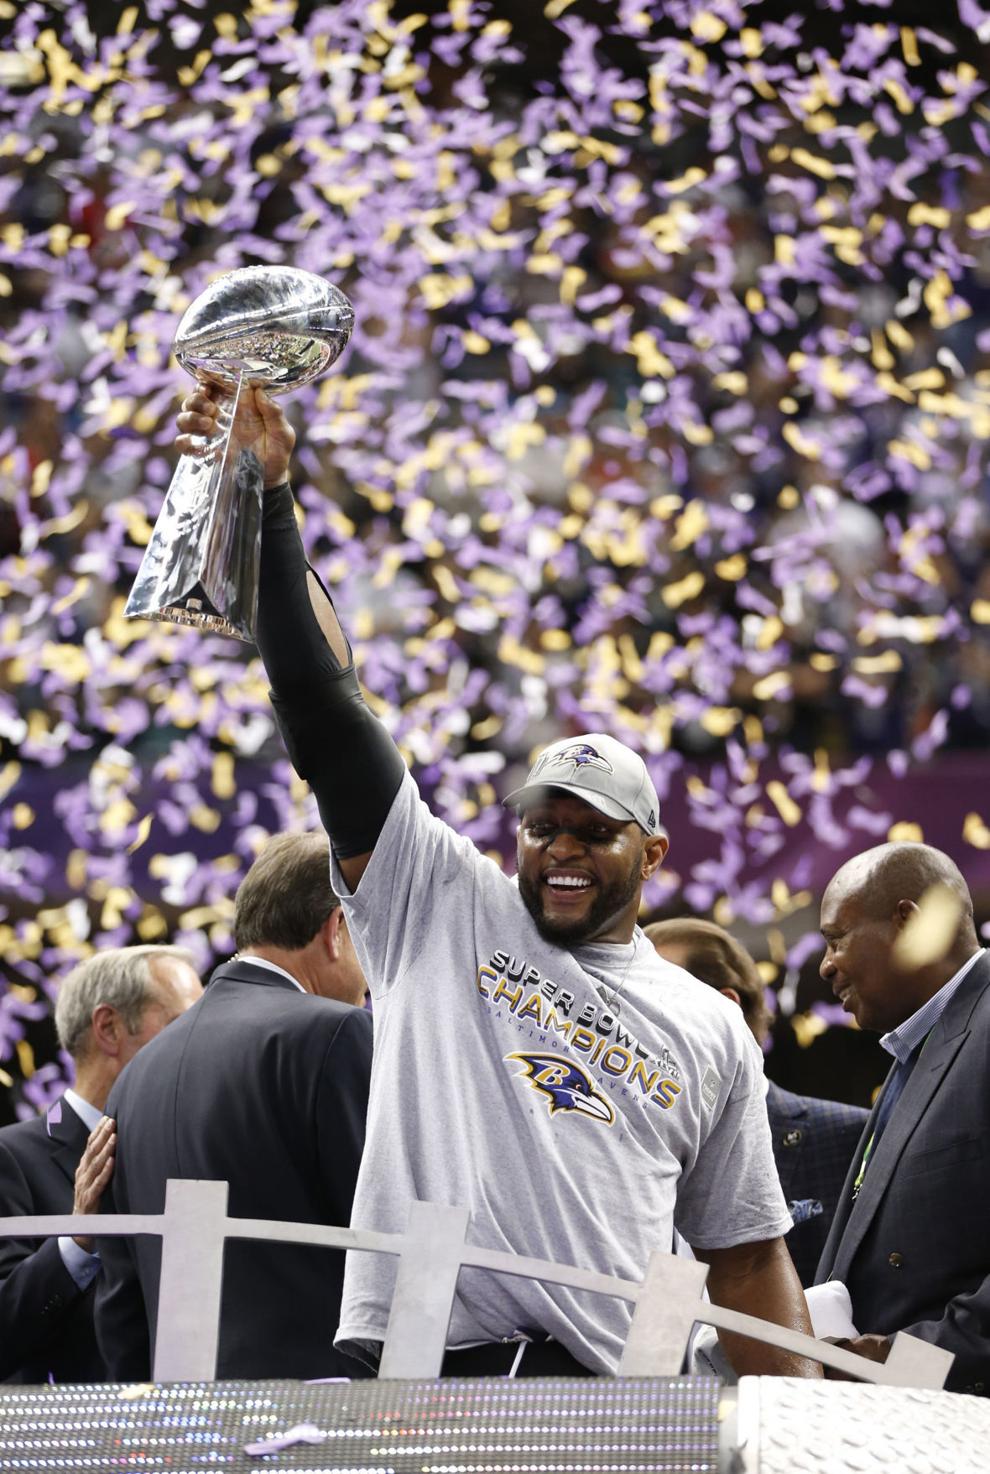 Ravens legend Ray Lewis elected to Hall of Fame on first ballot ...